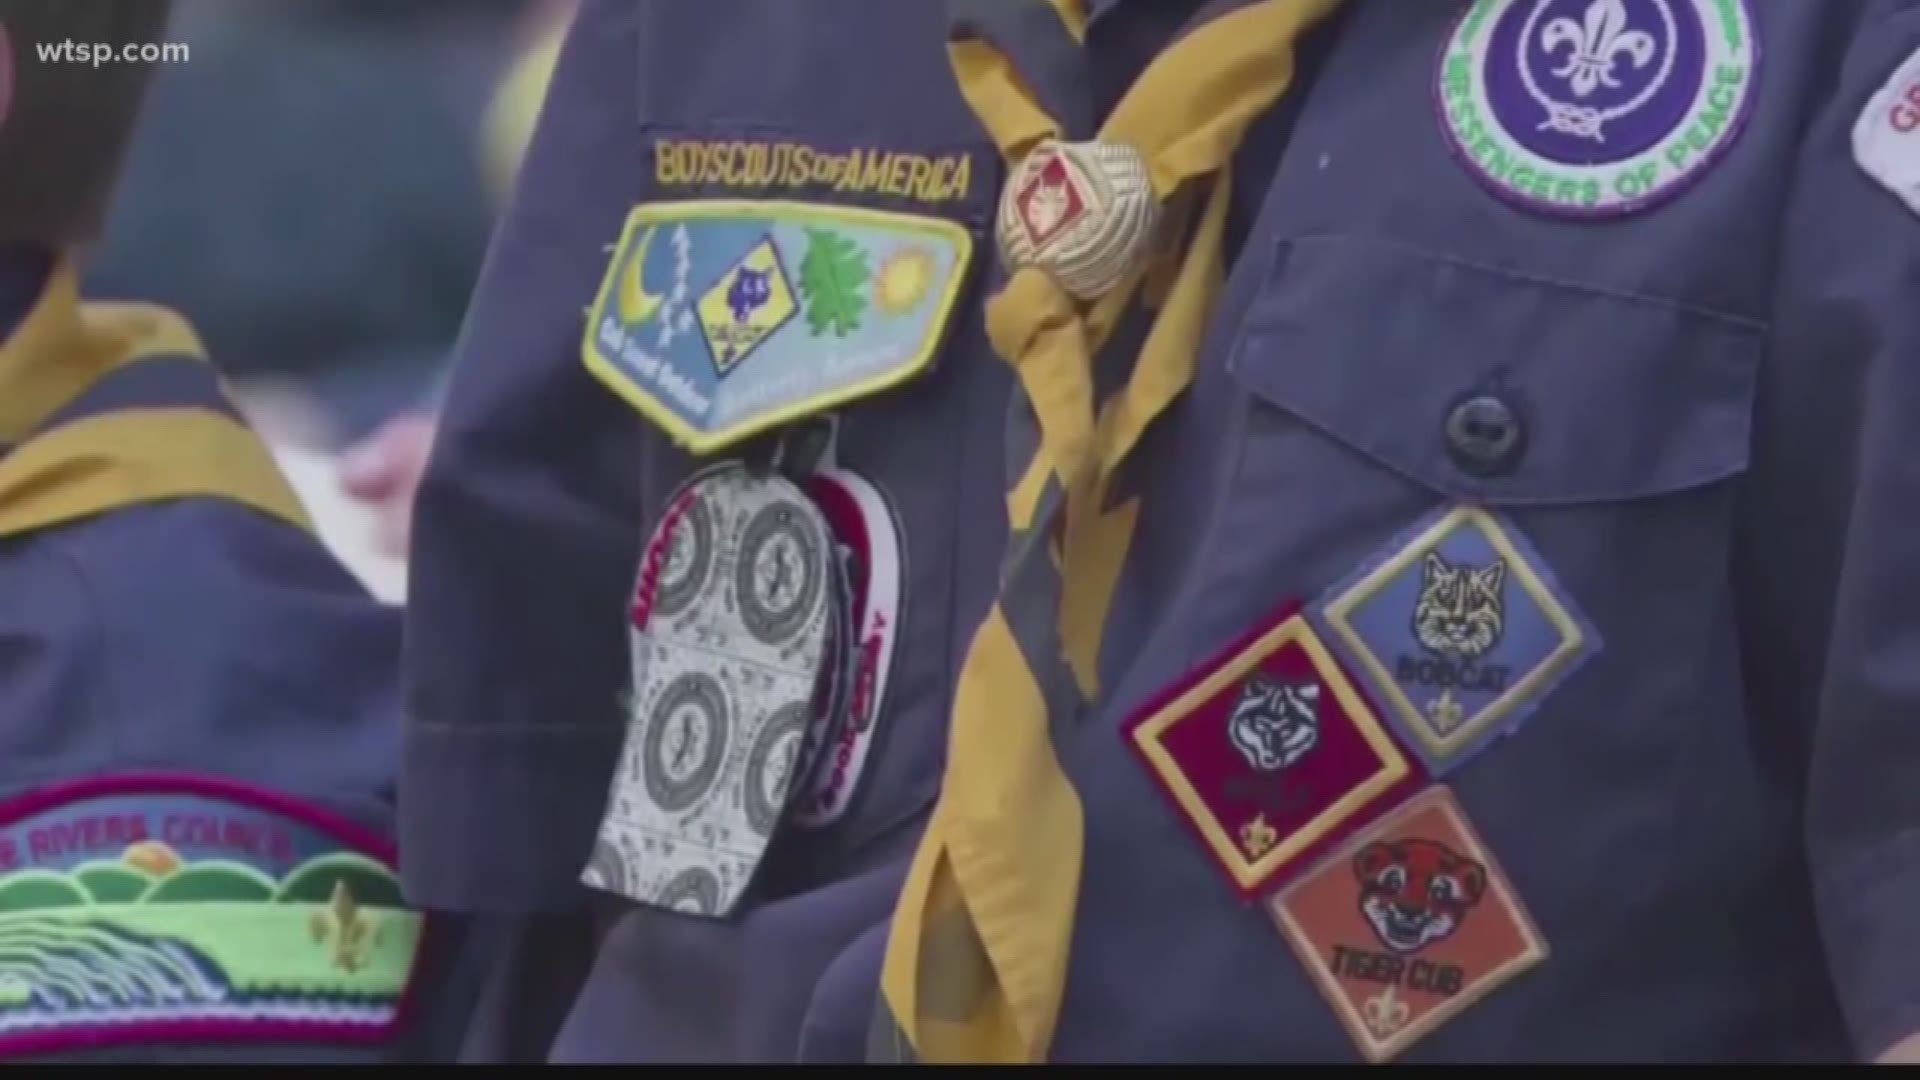 The national chapter of the Boy Scouts of America says it’s declaring bankruptcy.